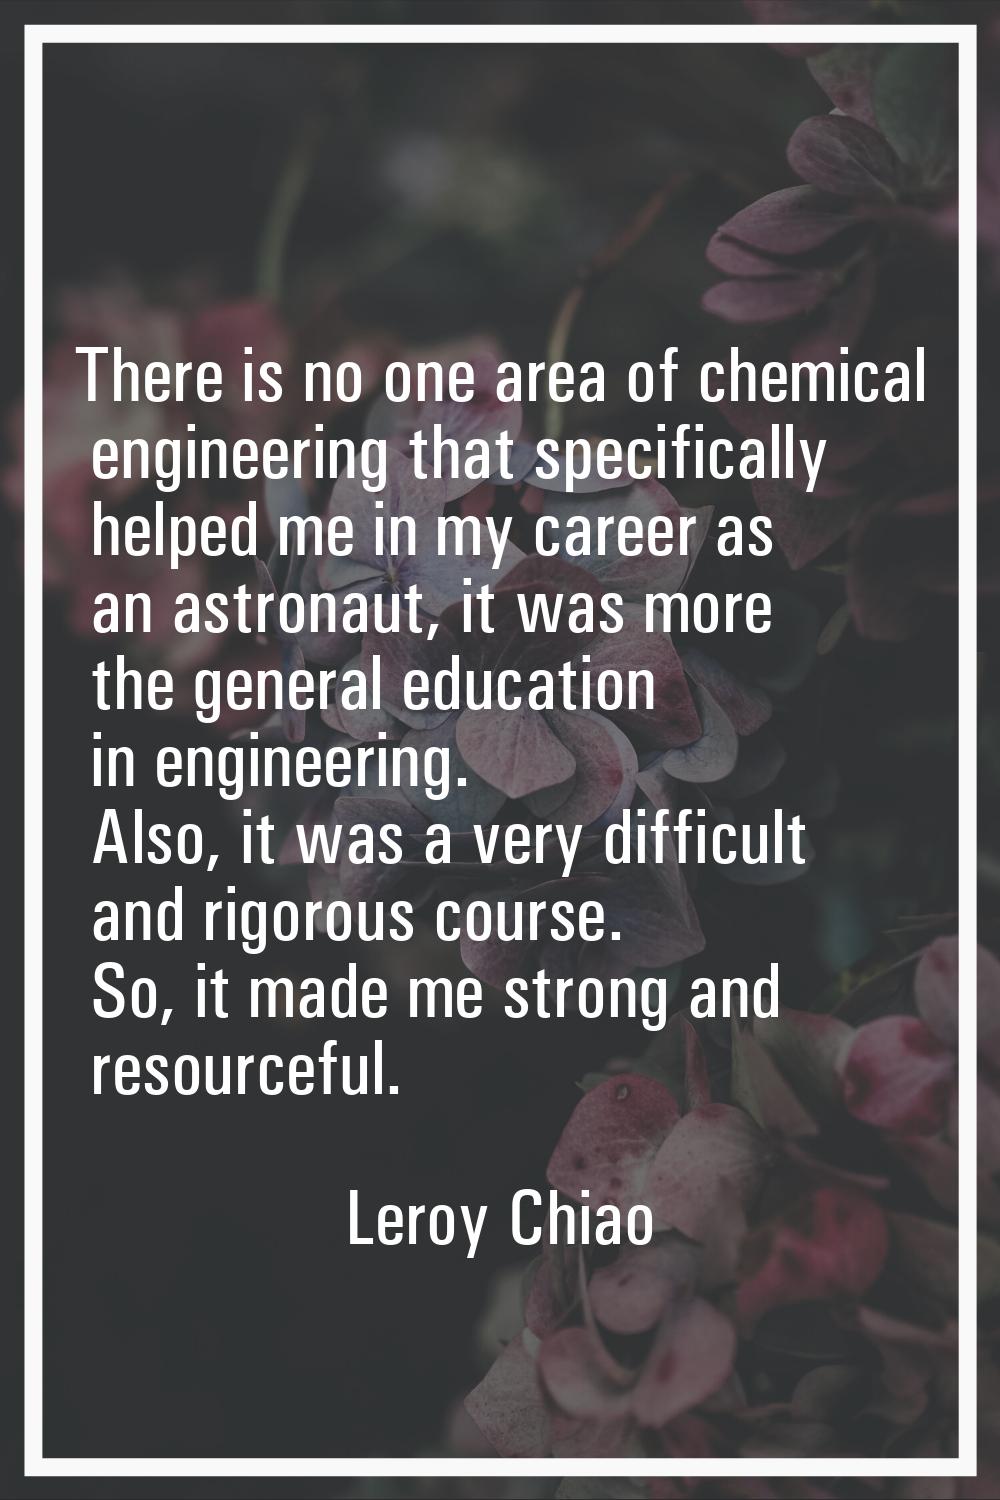 There is no one area of chemical engineering that specifically helped me in my career as an astrona